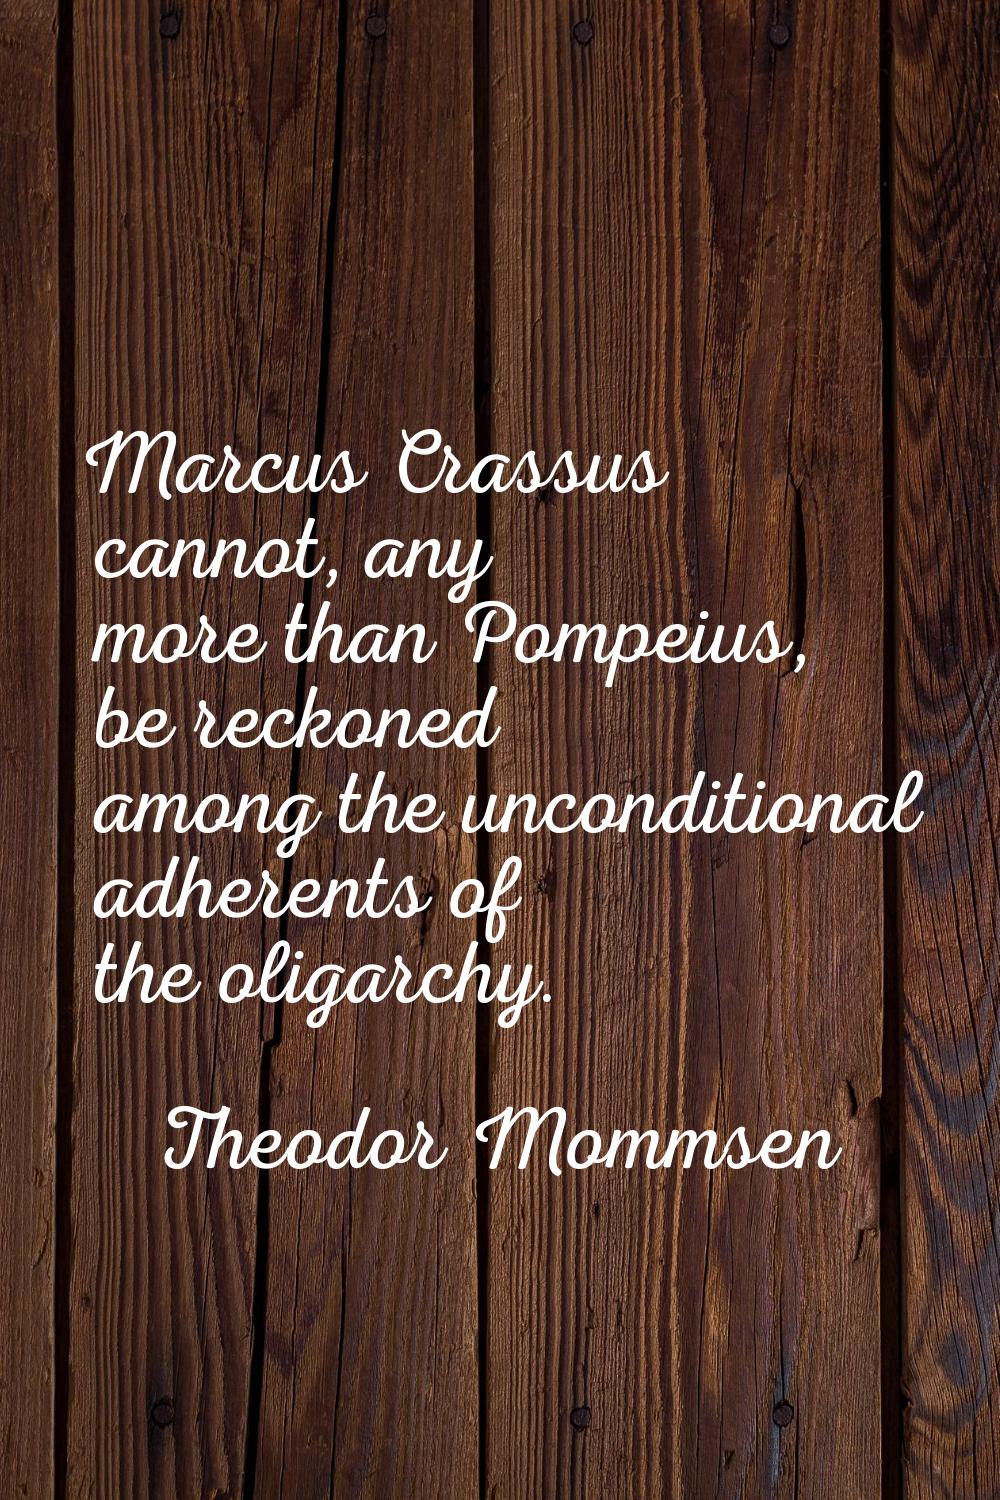 Marcus Crassus cannot, any more than Pompeius, be reckoned among the unconditional adherents of the